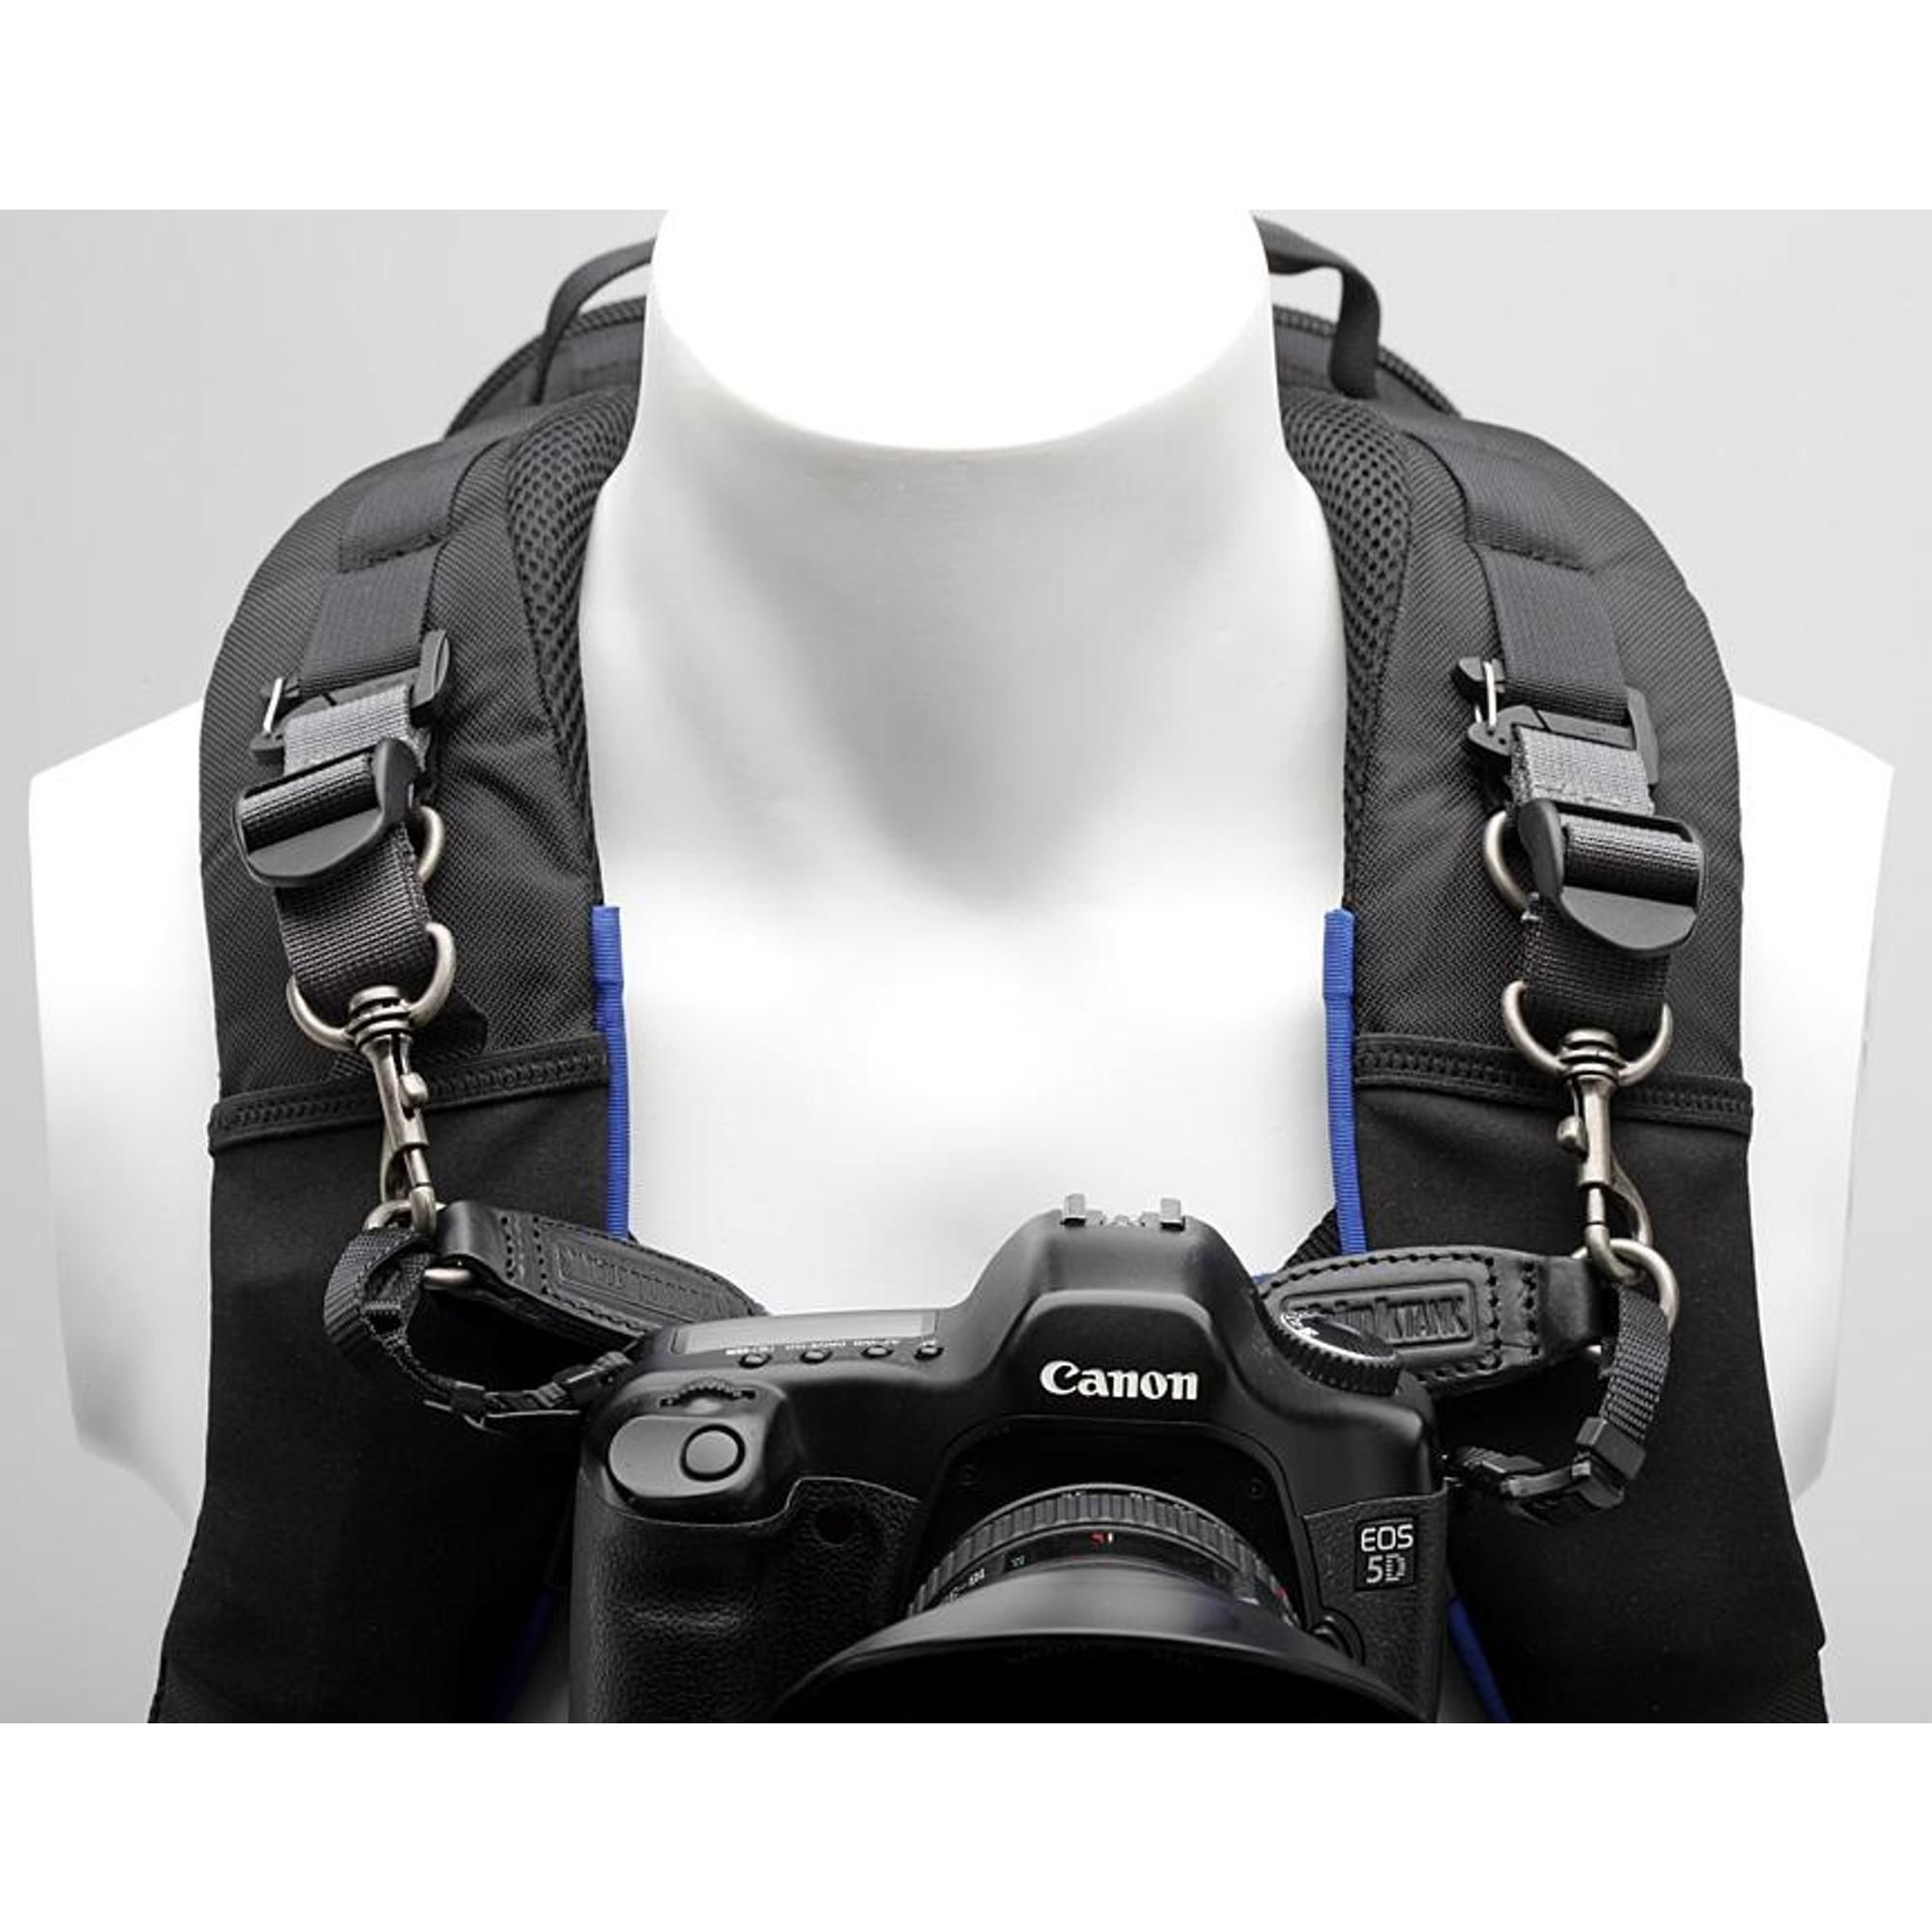 SlingBelt Carrying System for 2 Cameras – Cotton Camera Carrying